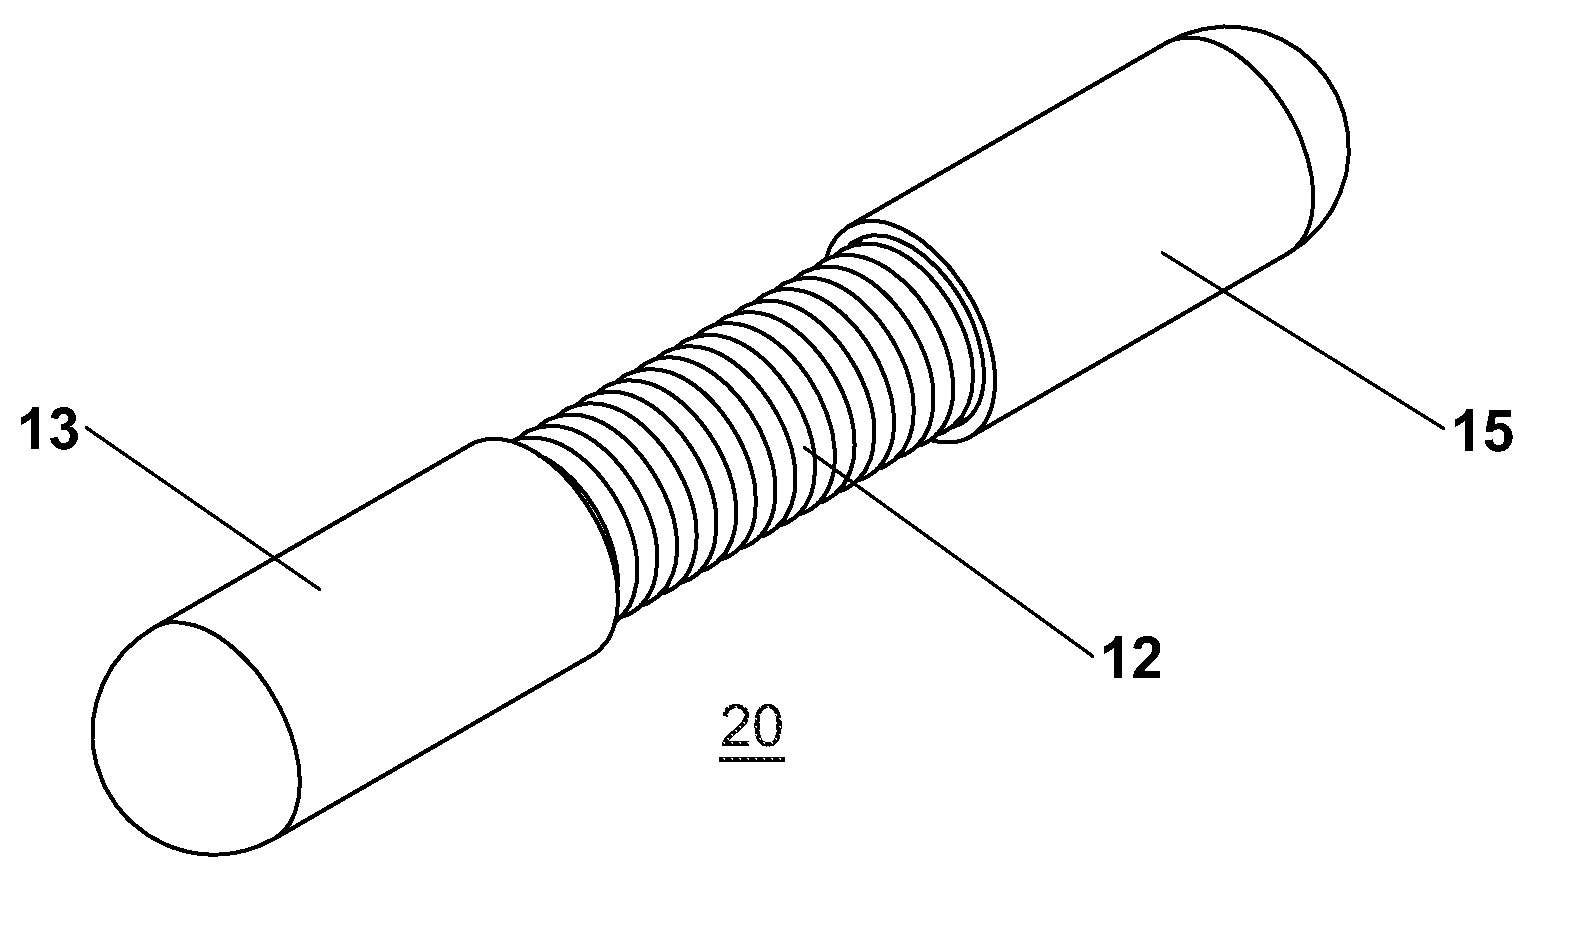 Flexible rod assembly for spinal fixation